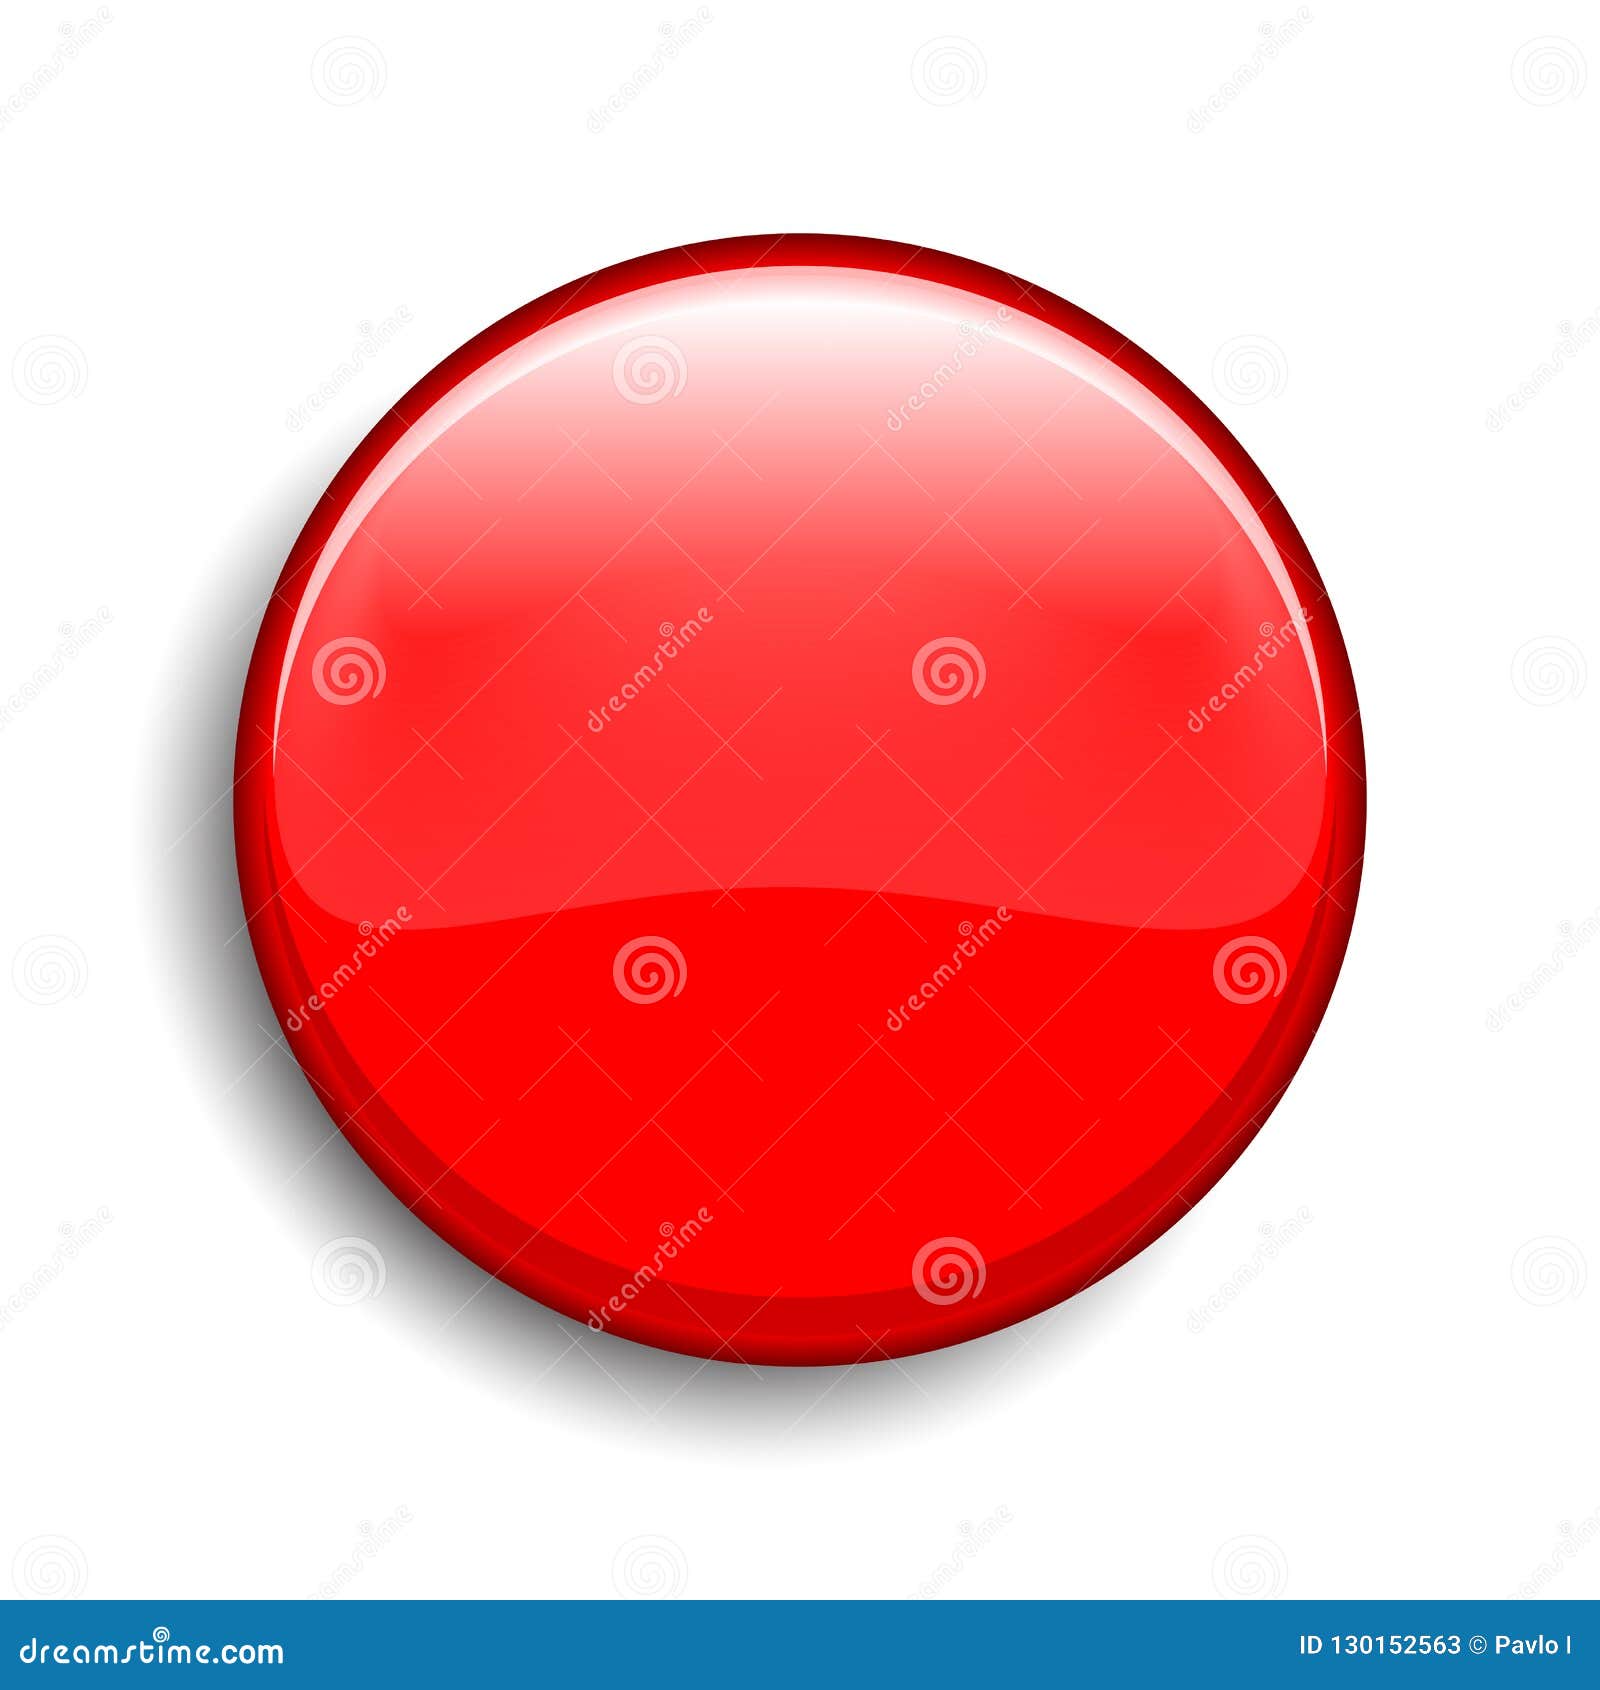 Pressed button with red light Royalty Free Vector Image